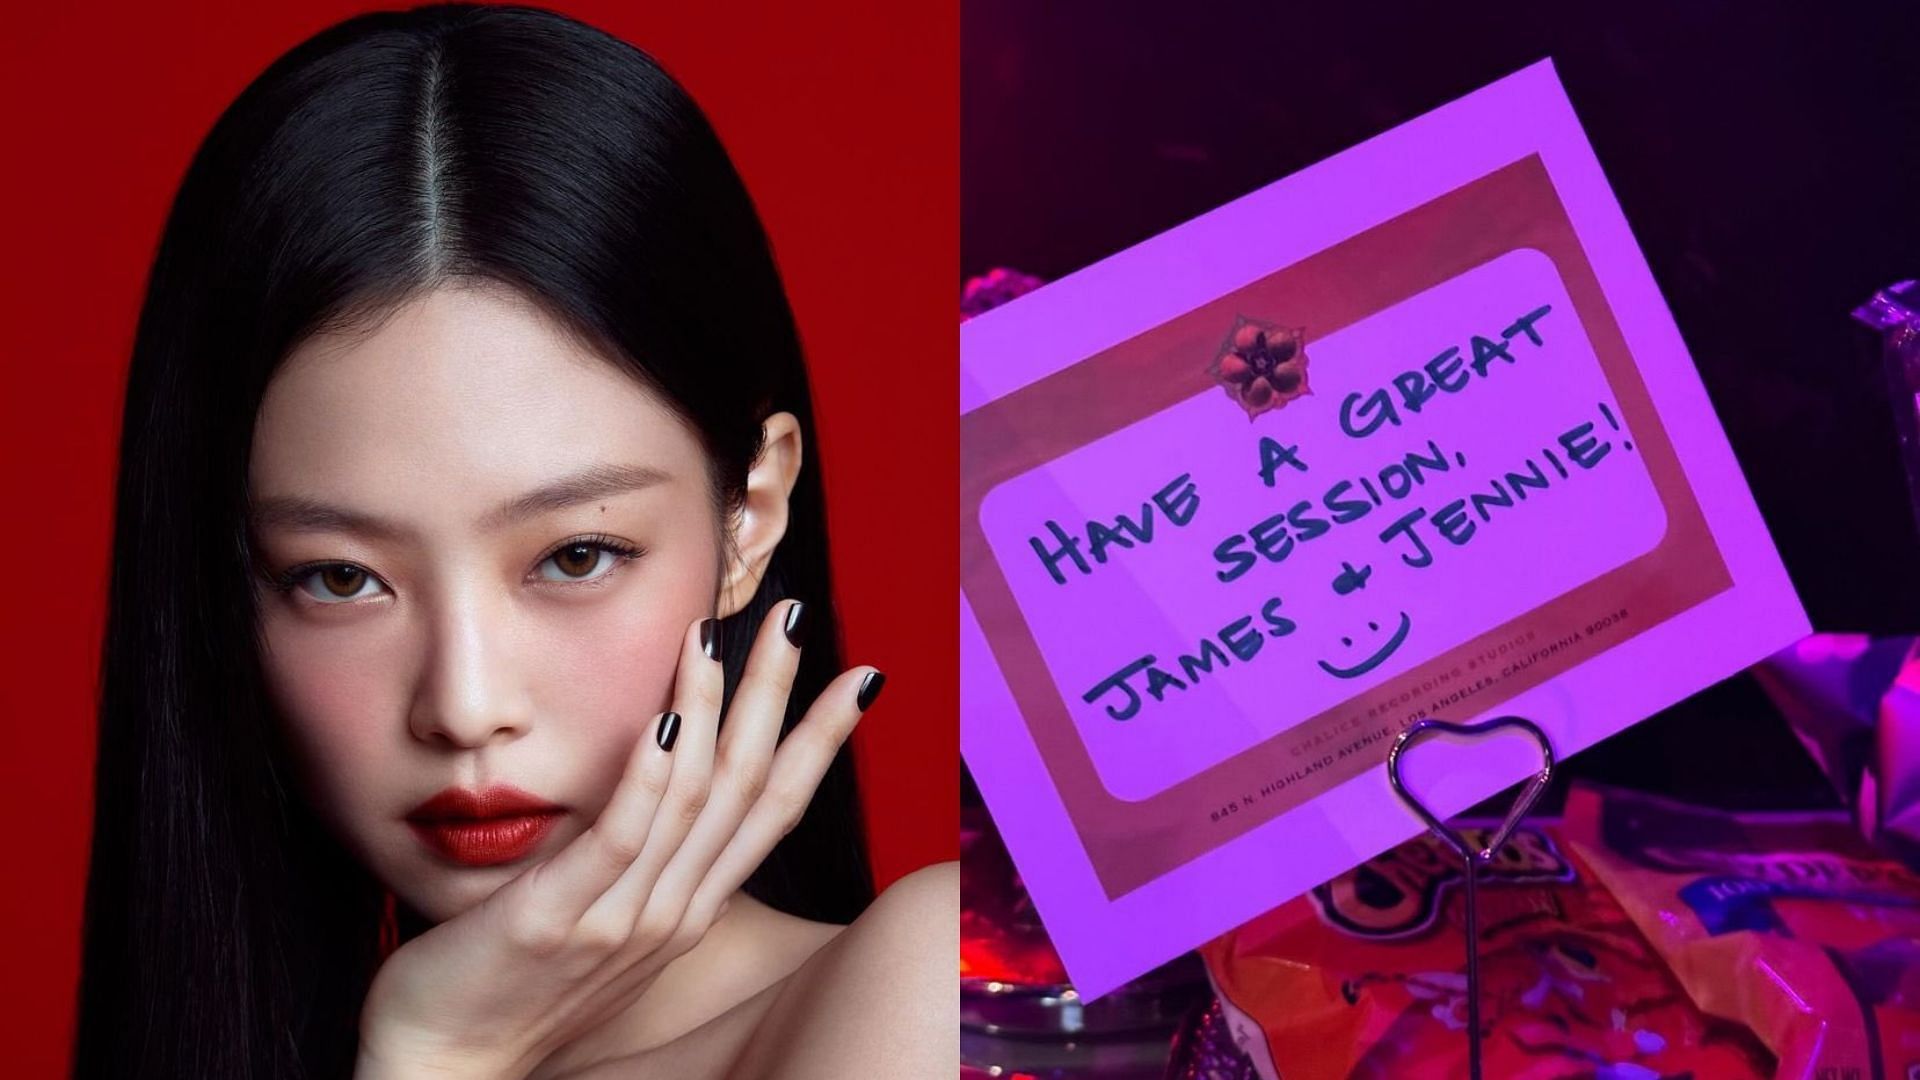 Jennie reportedly starts shooting for her debut solo album (Images via Twitter/blackpinkbabo)